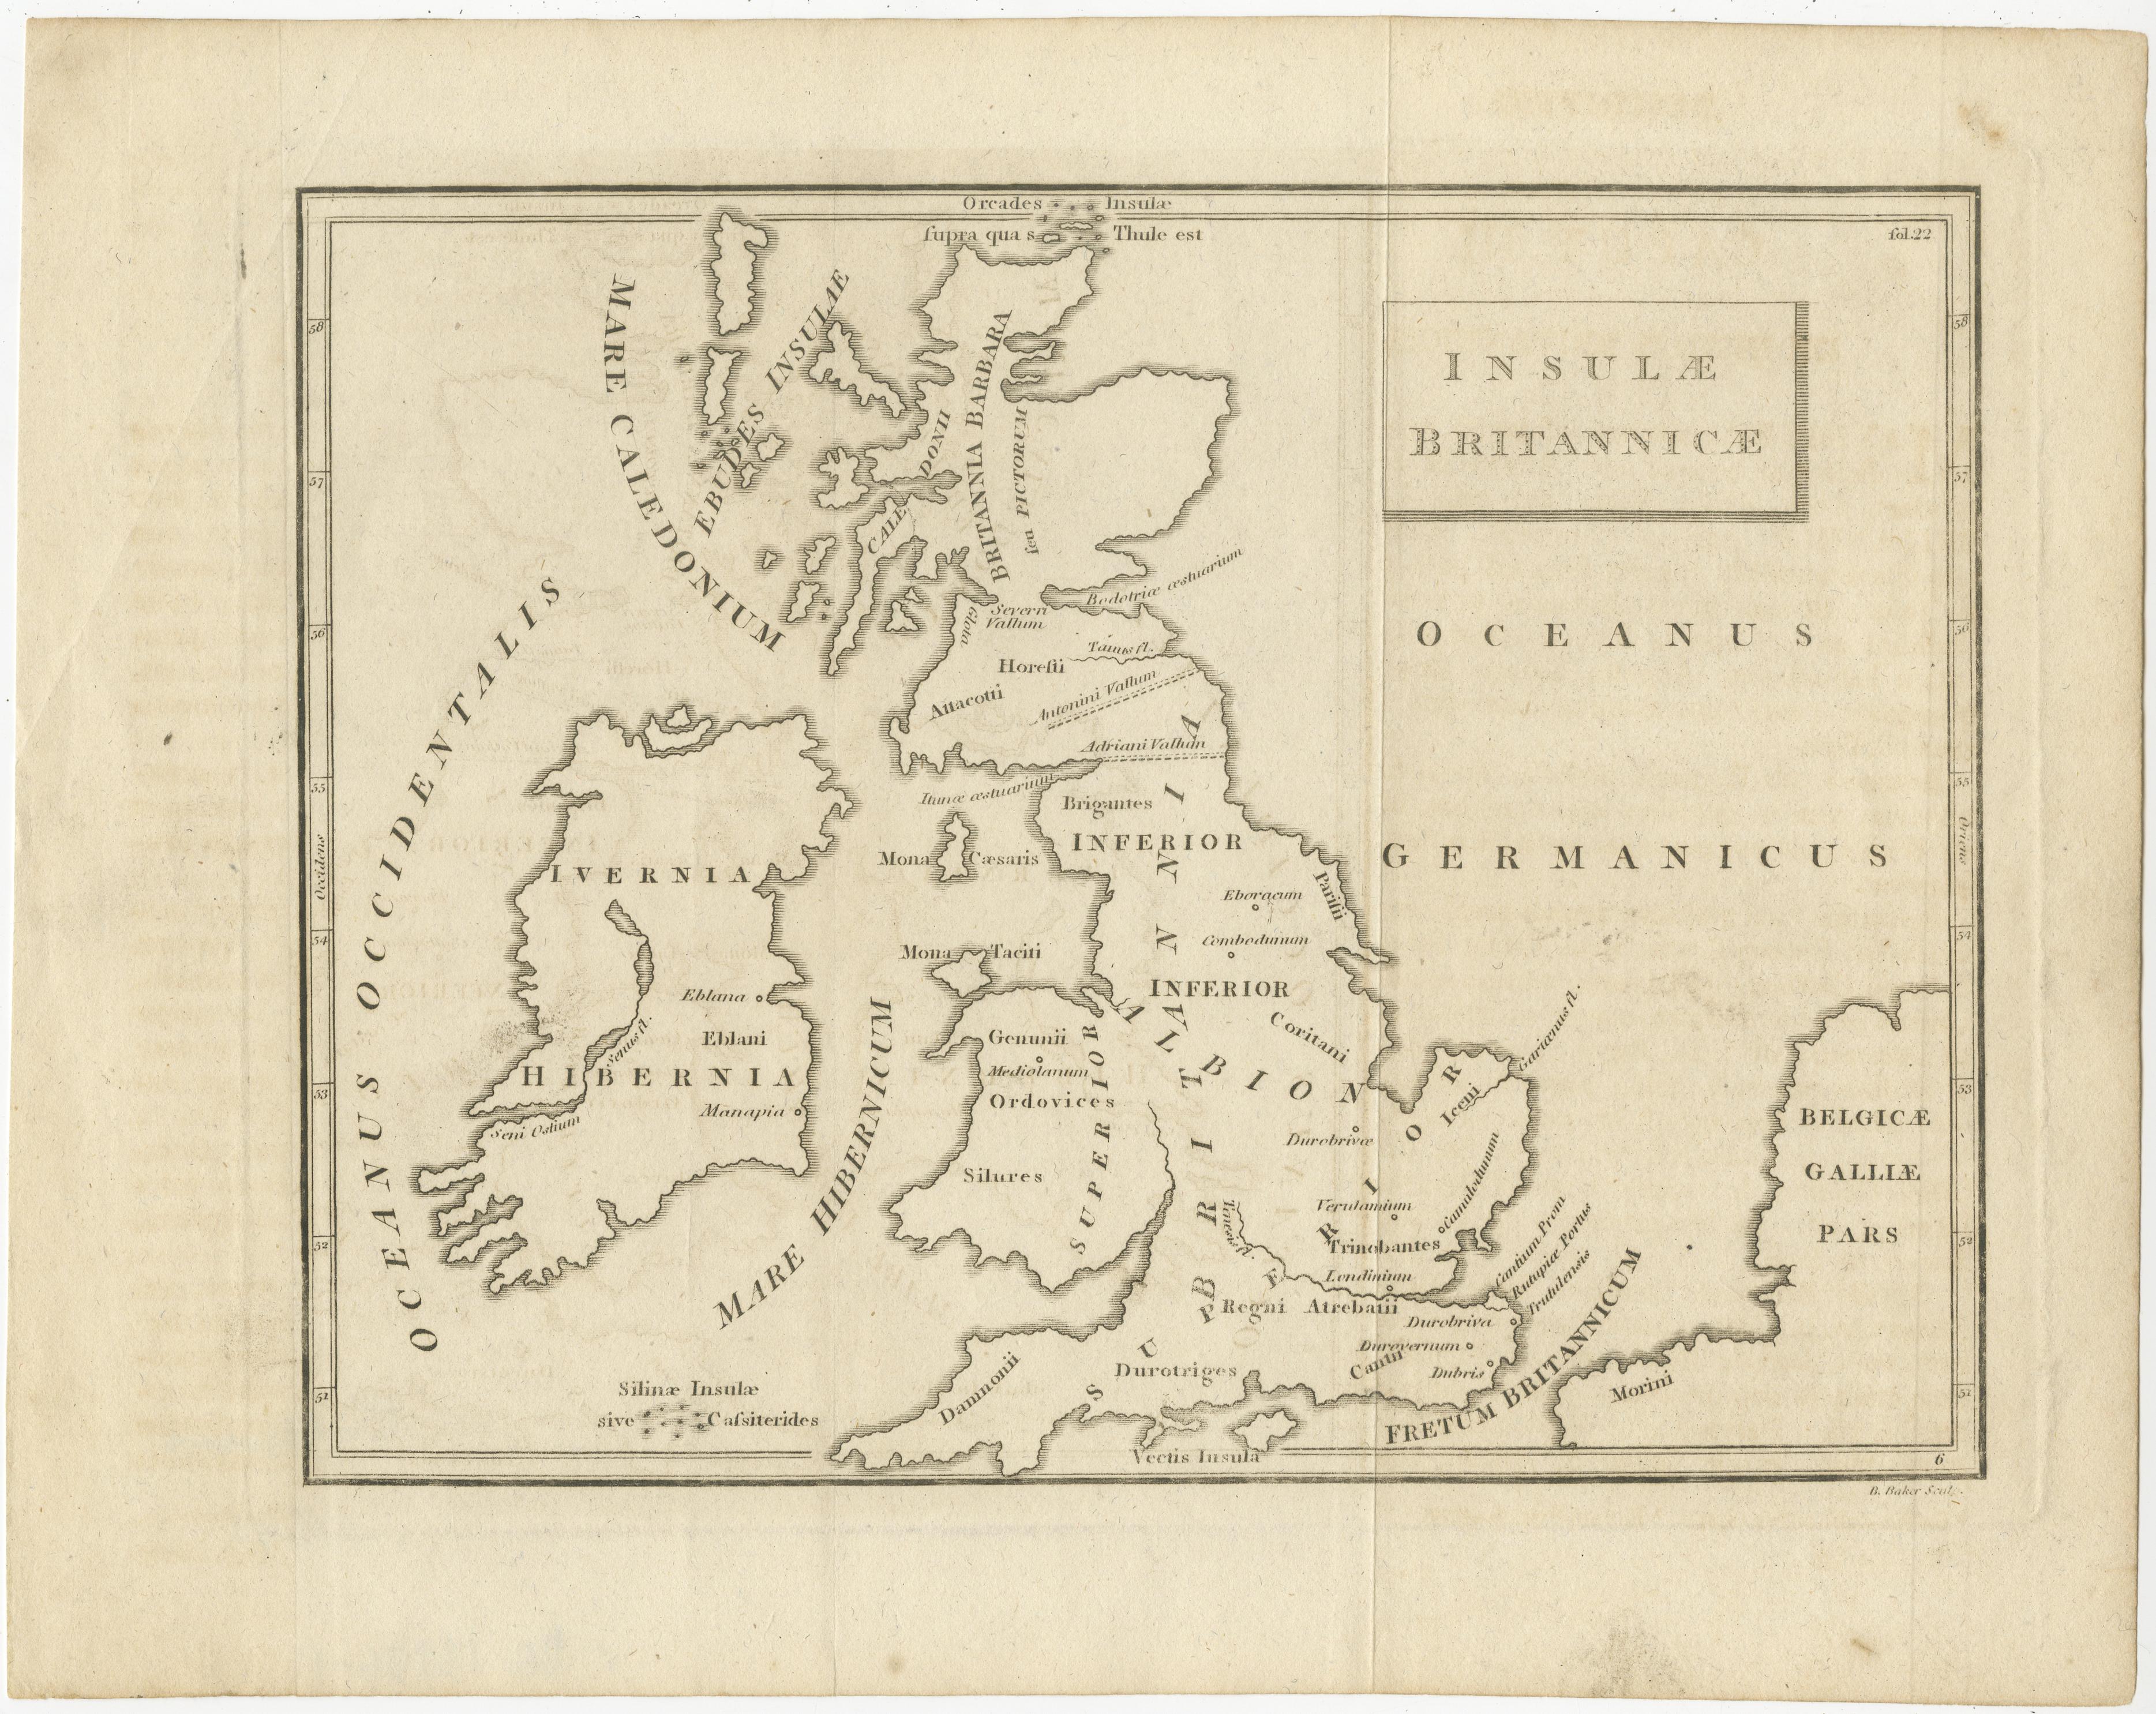 Antique map titled 'Insulae Britannicae'. Interesting map of Britain, Scotland, and Ireland. It shows a rudimentary outline of the islands according to the geography of the Roman Empire, after Caesar’s legions subjugated the numerous local tribes in